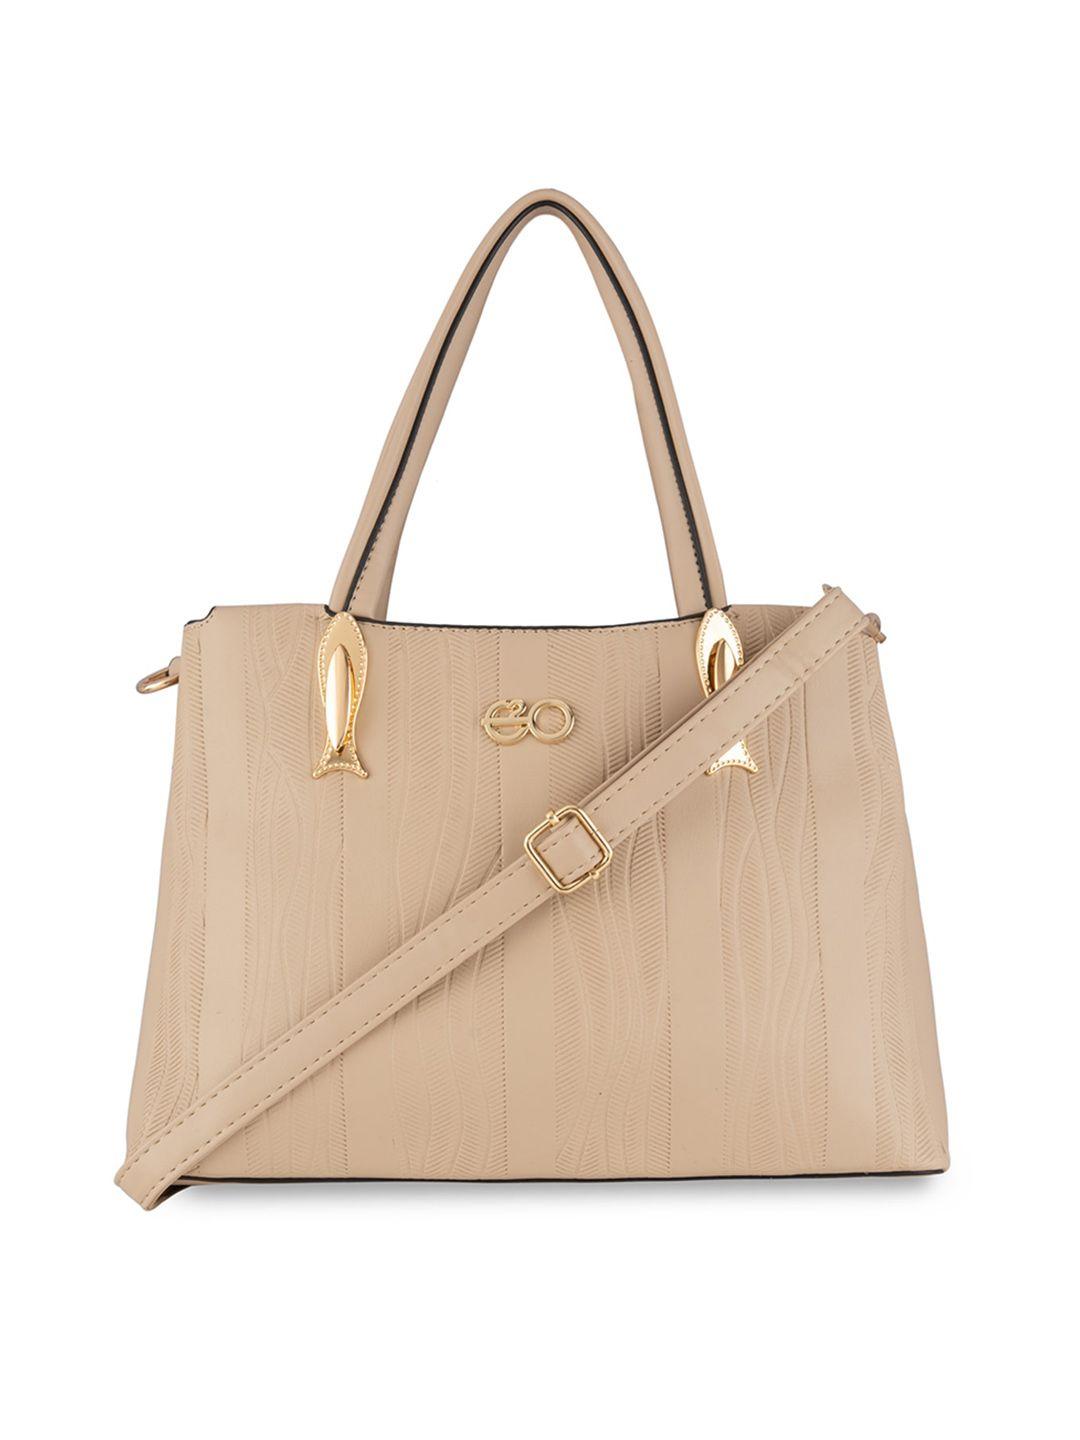 e2o beige textured pu structured shoulder bag with quilted